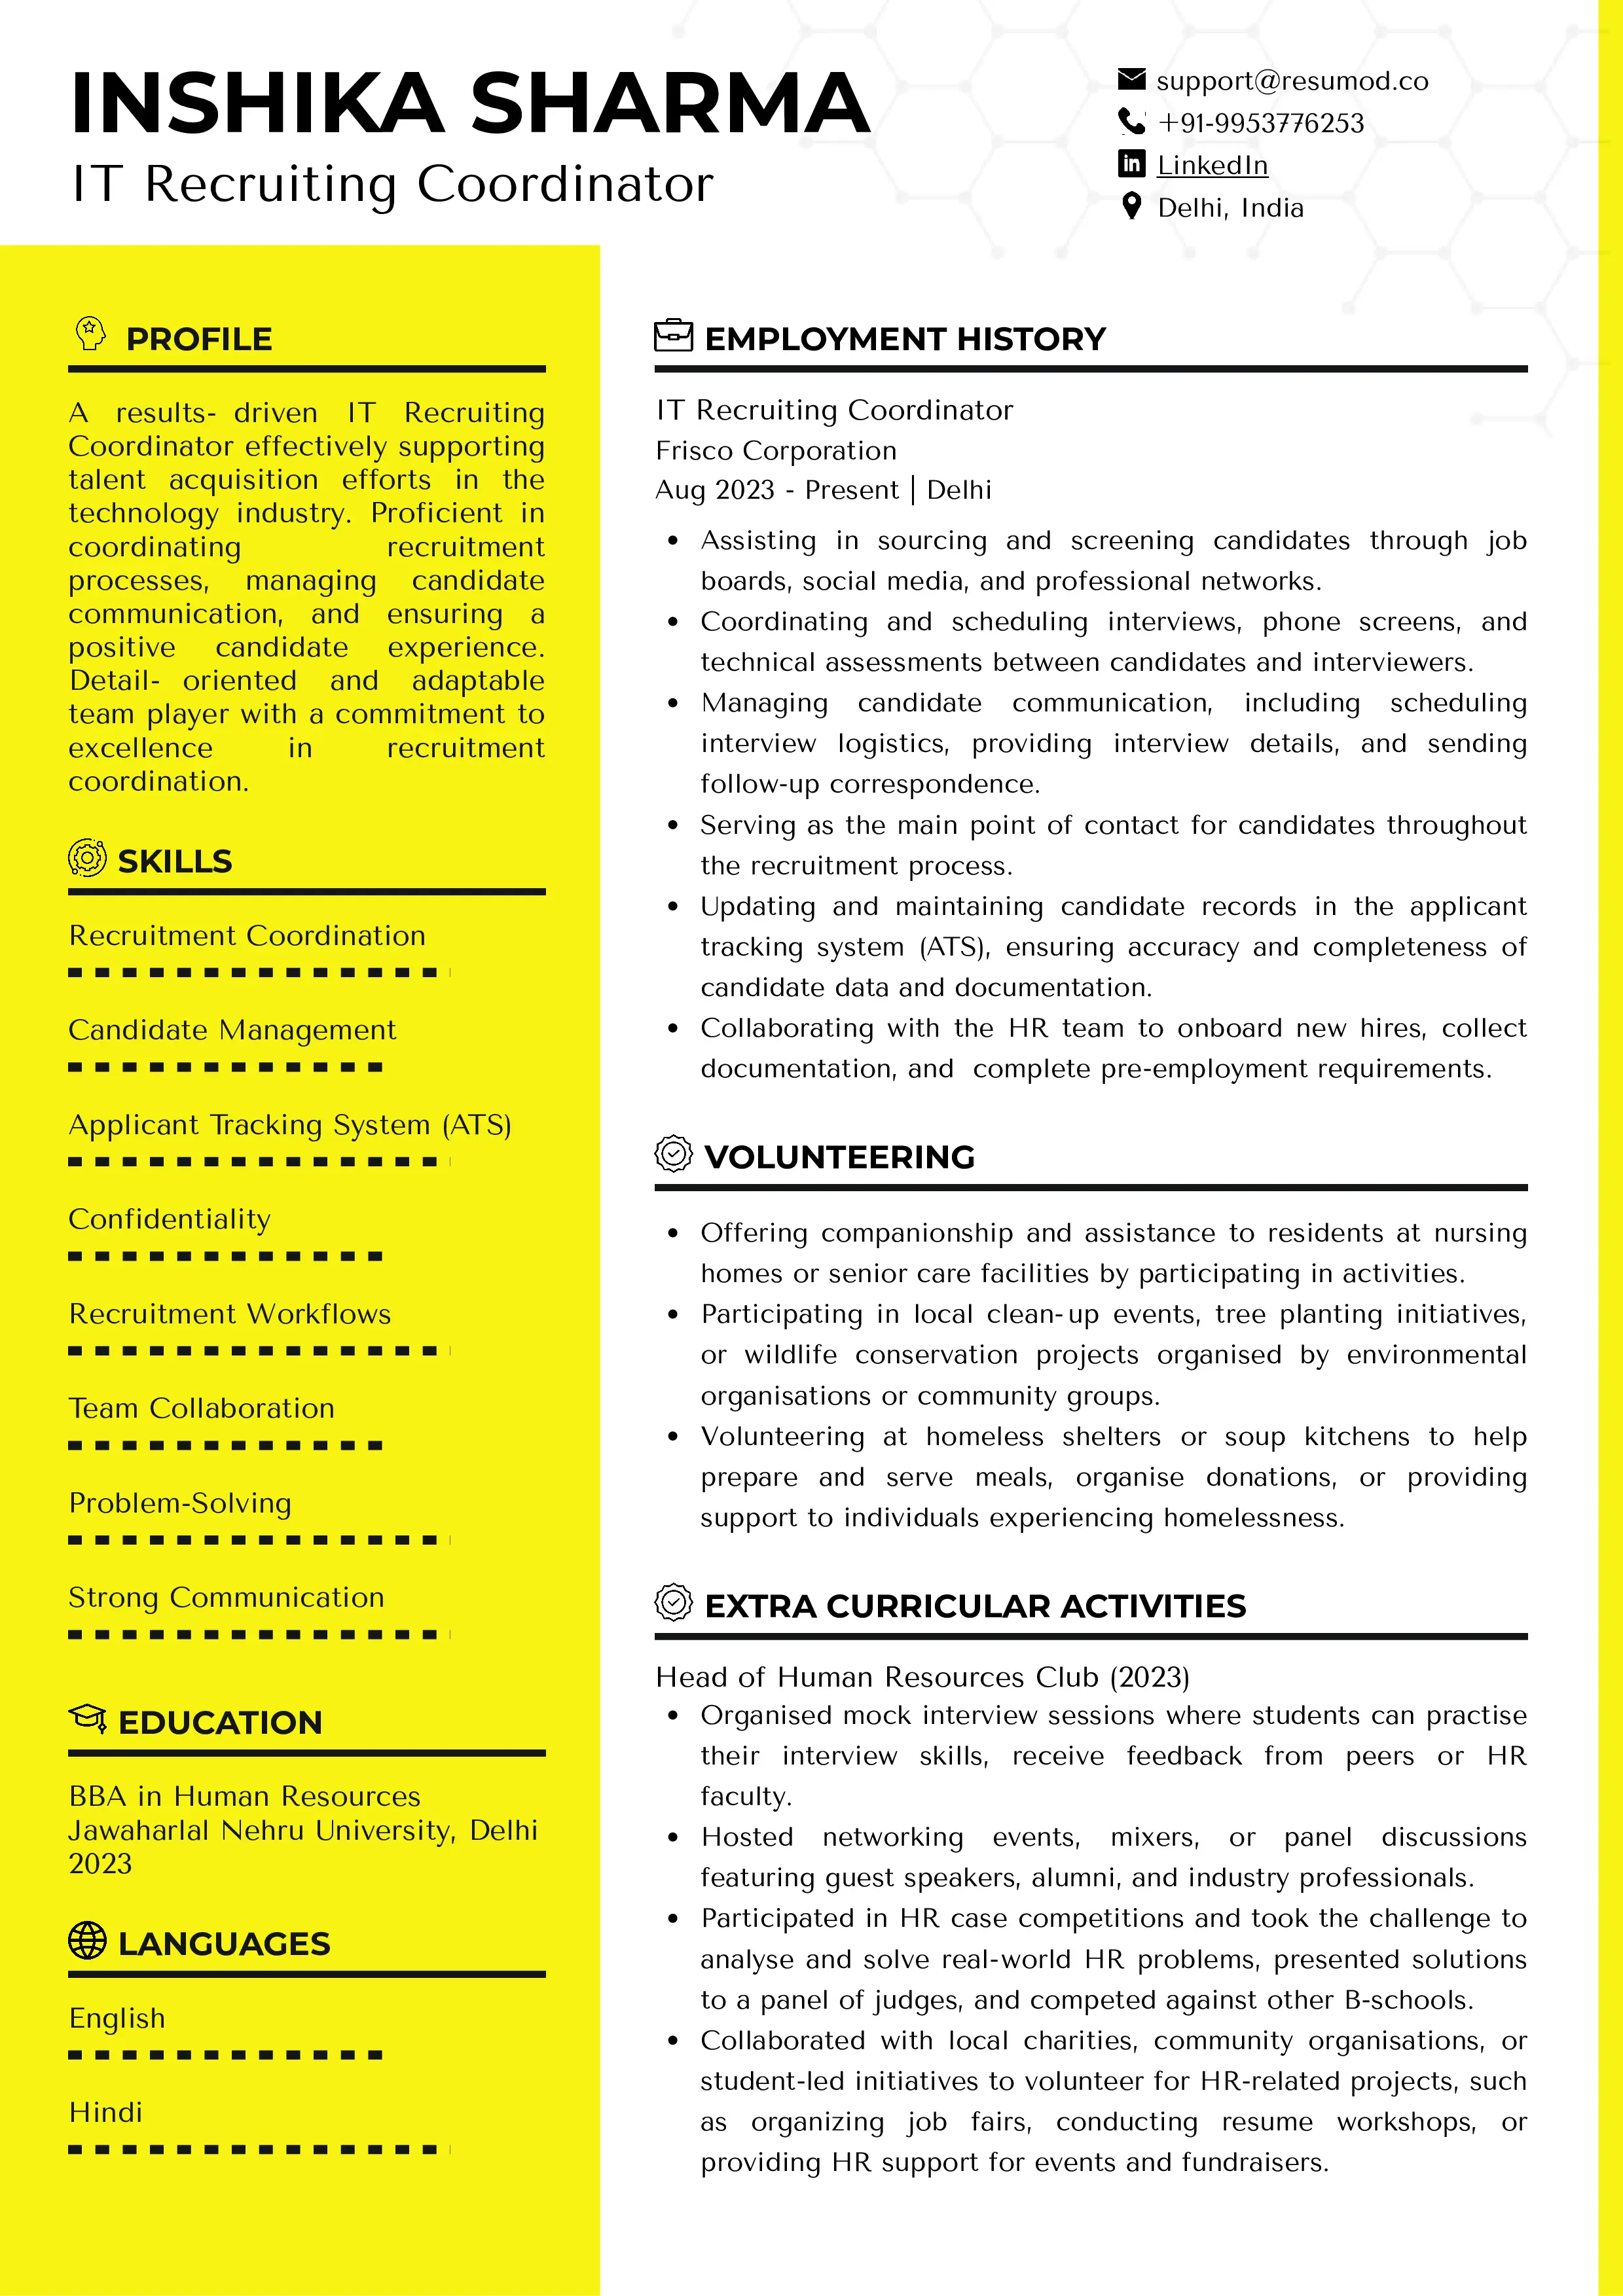 Sample Resume of IT Recruiting Coordinator | Free Resume Templates & Samples on Resumod.co